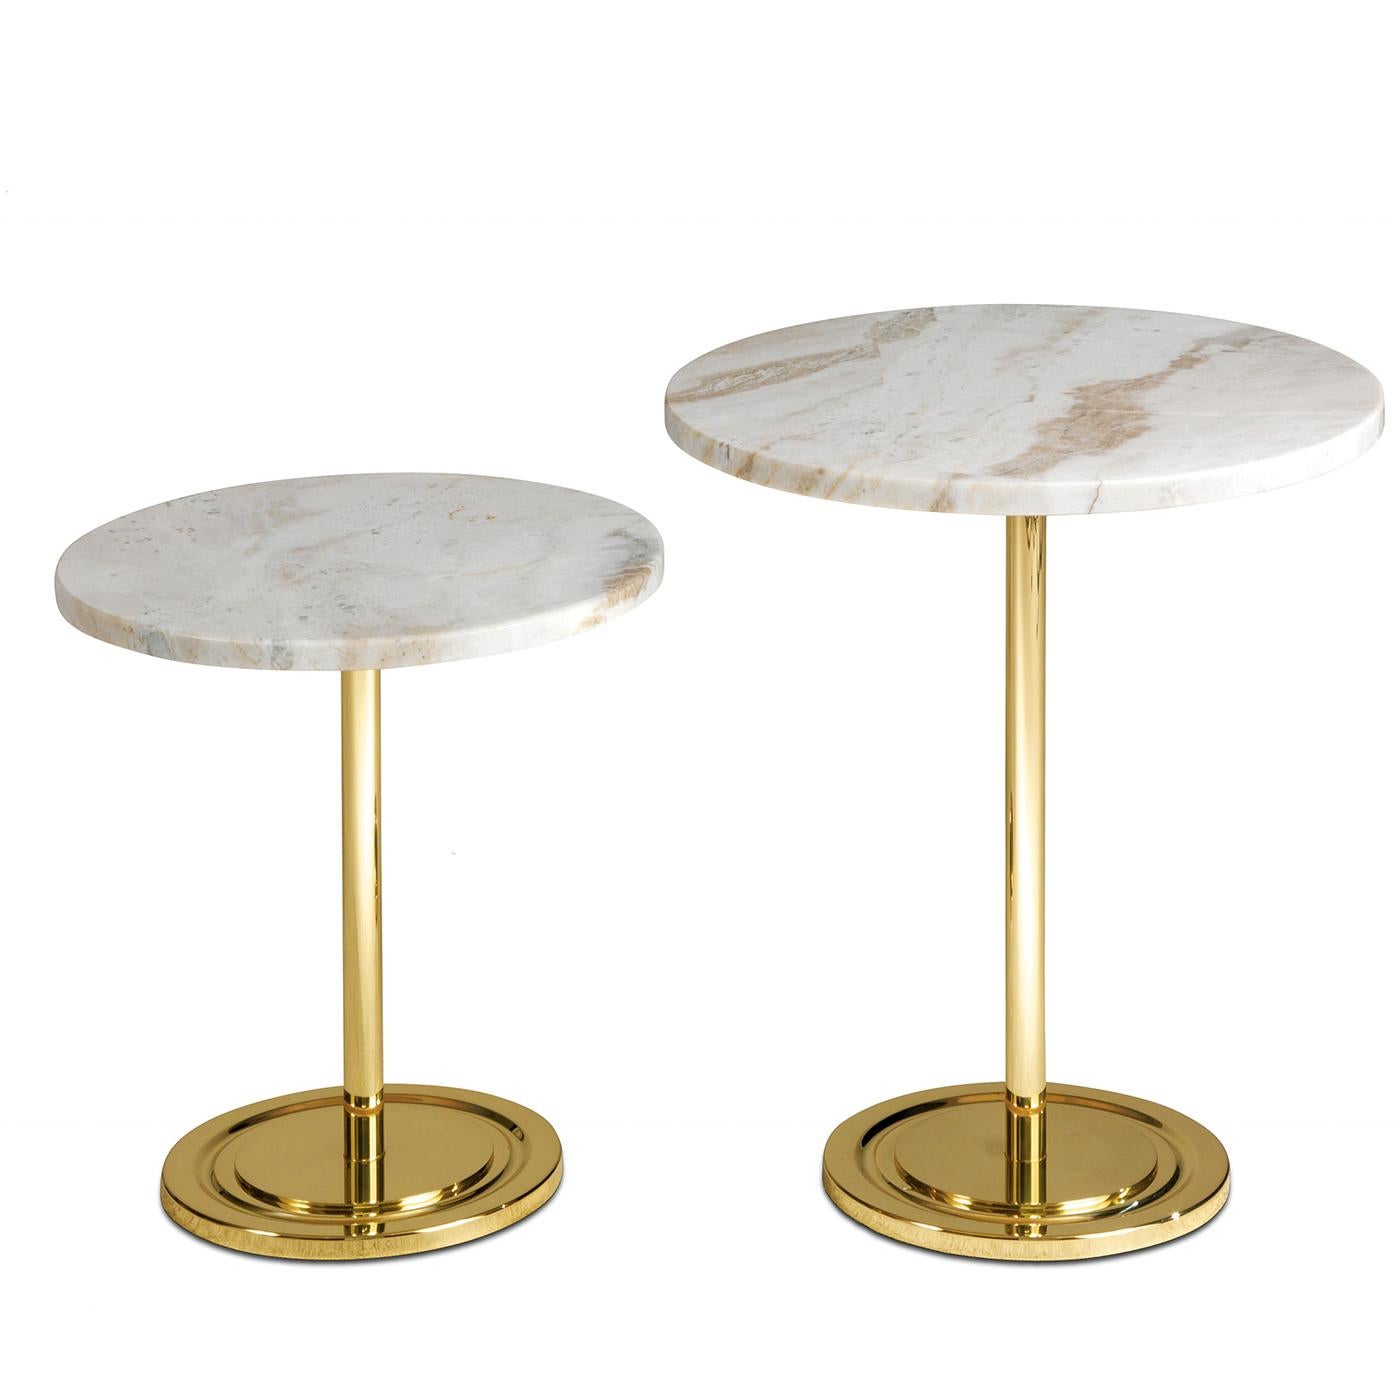 This sophisticated side table is a versatile addition to any living room, thanks to its combination of traditional materials and minimalist silhouette. The base is made up of a round base with a central leg supporting the top in Corteccia marble.